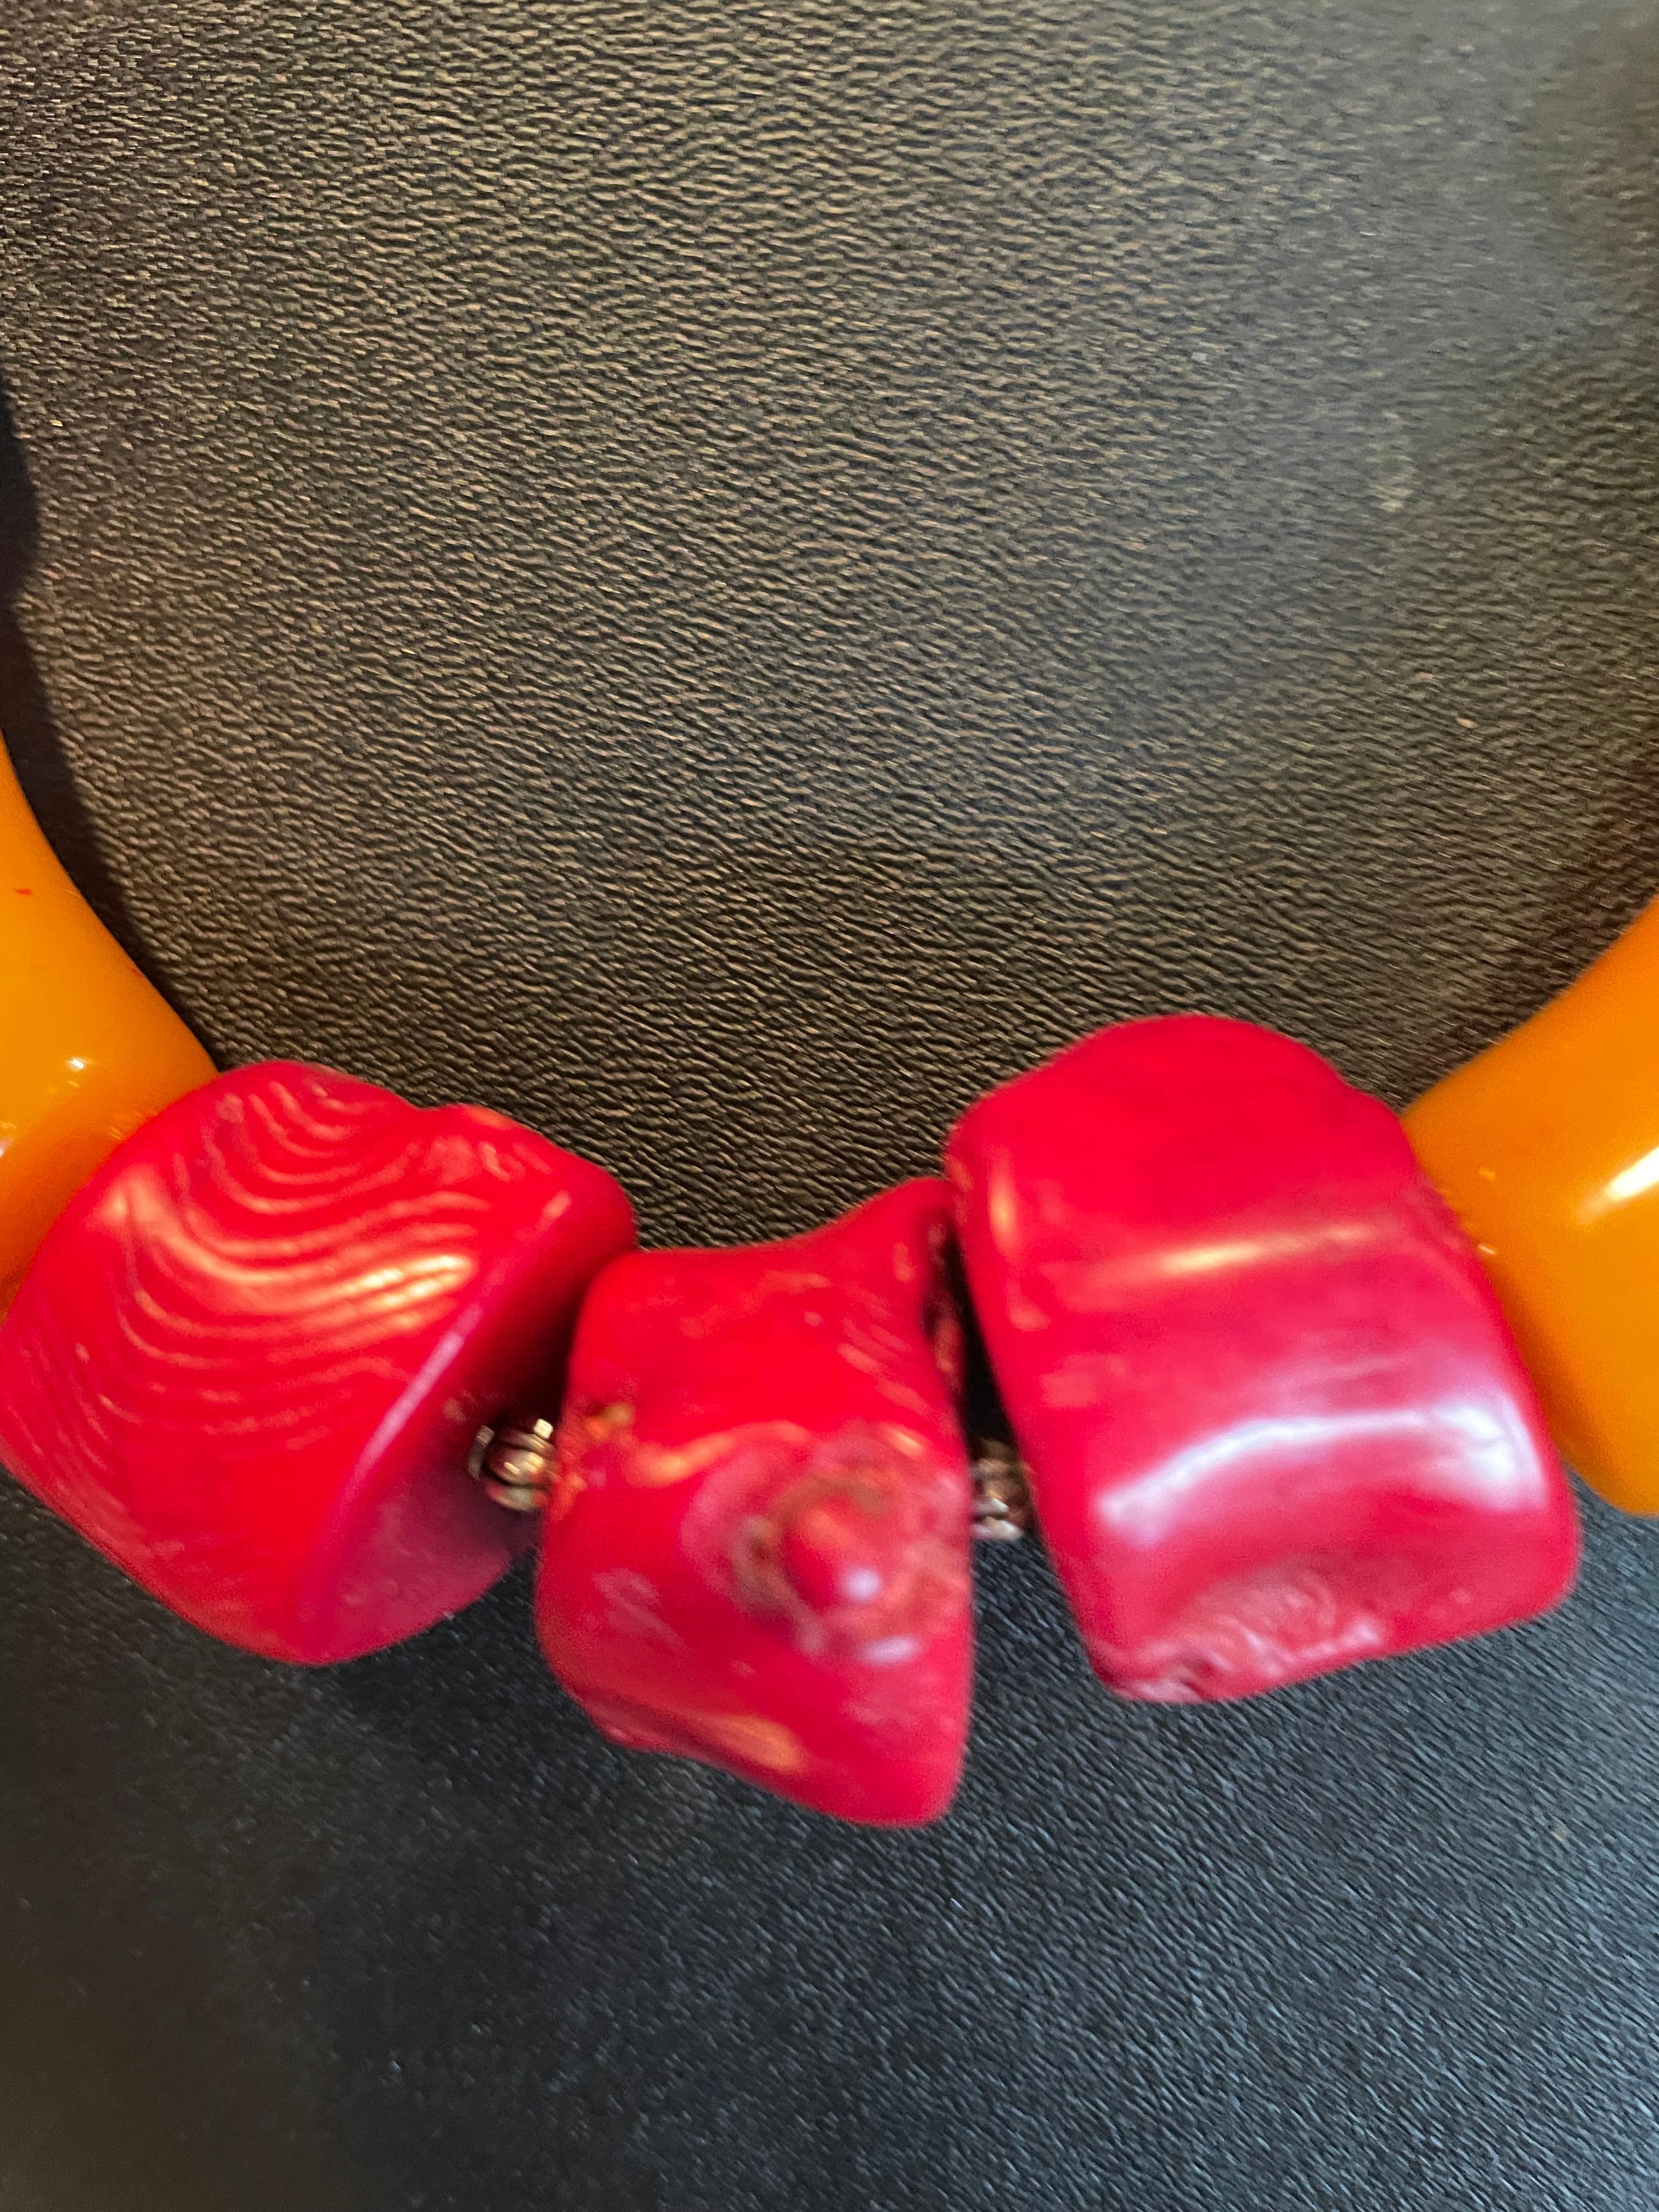 Lorraine’s Bijoux offers  Dramatic, French 80’s Bakelite and Chinese Red Coral , one of a kind, handmade necklace. Sterling Silver spacer beads and lobster clasp enhance the delicious colors. This is truly a Dramatic statement piece that will add